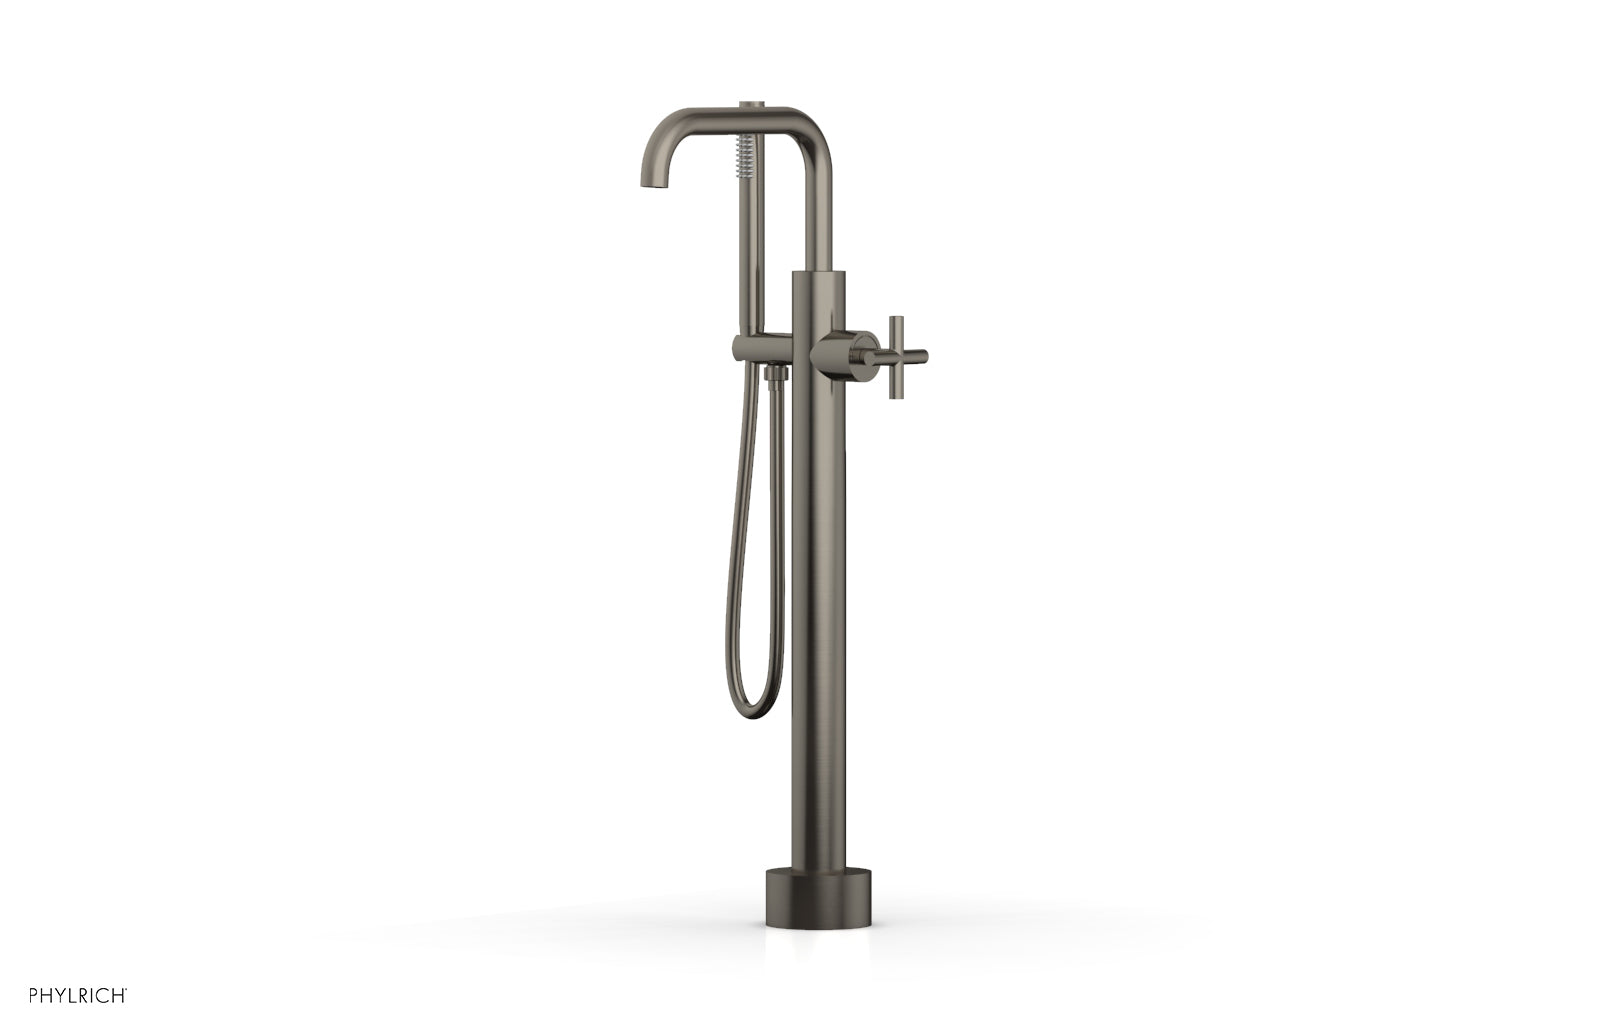 Phylrich TRANSITION Low Floor Mount Tub Filler - Cross Handle with Hand Shower